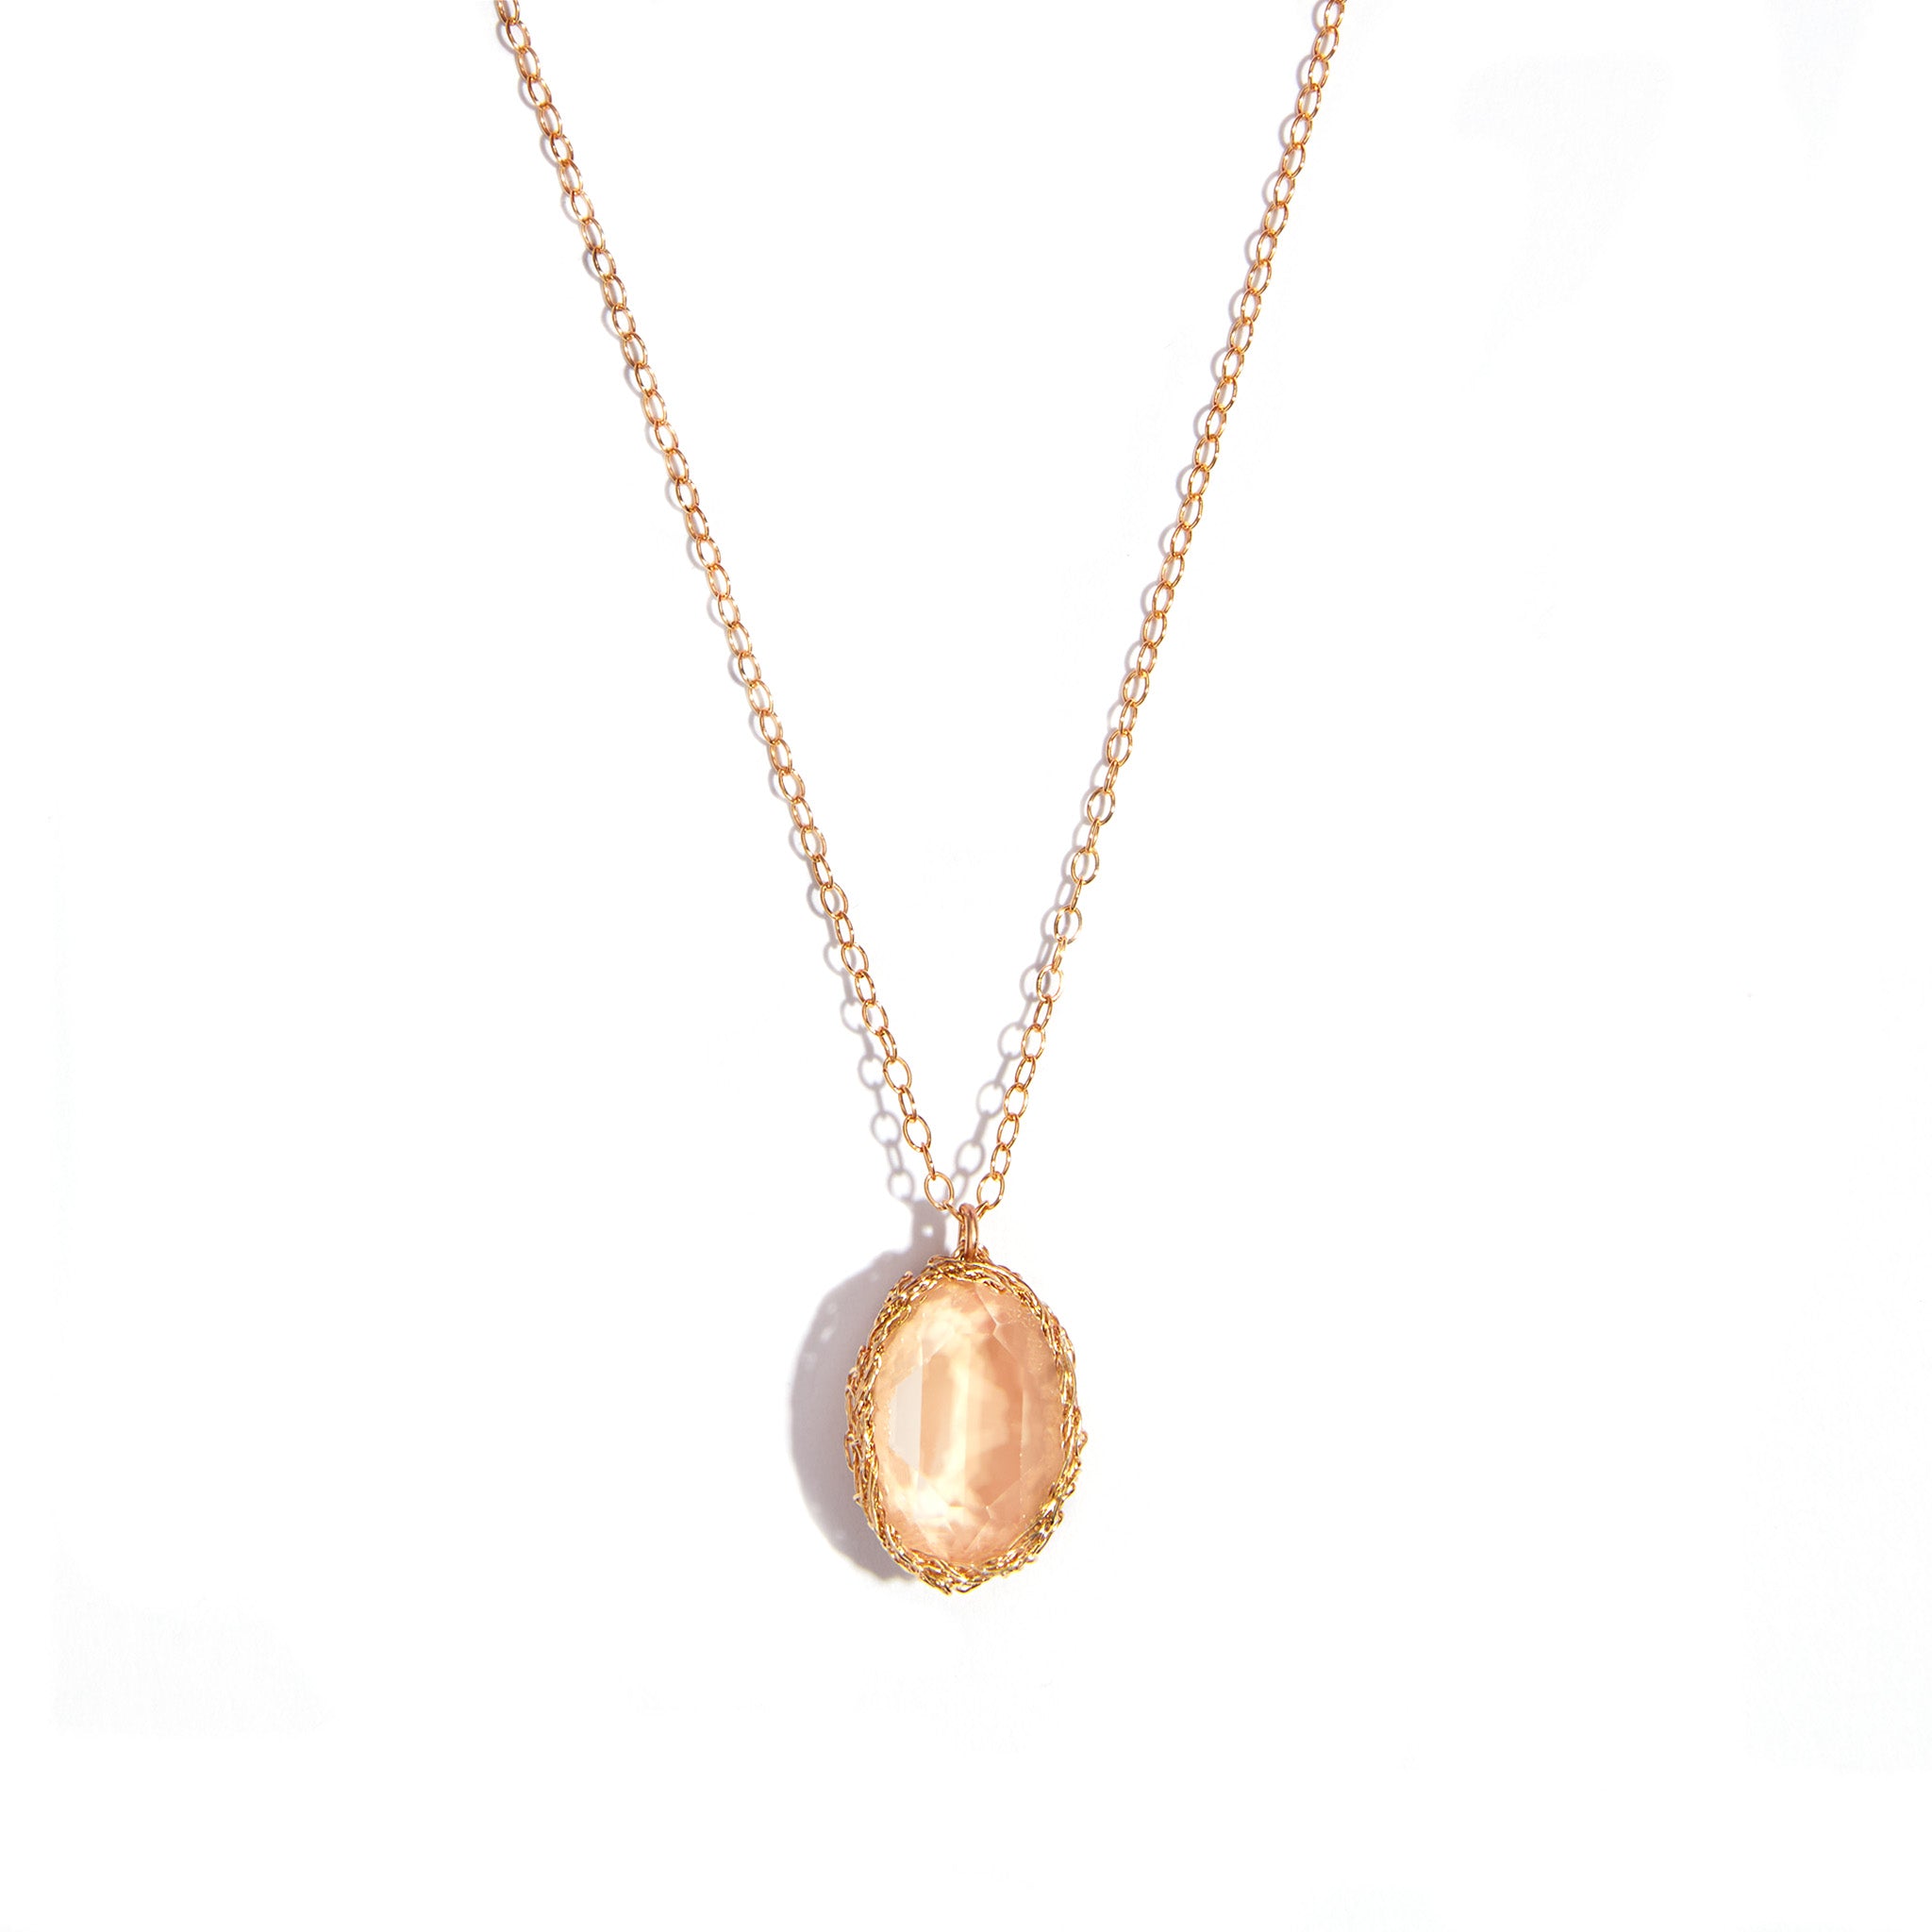 Close-up image of a crochet pendant featuring a sand opal stone, set in 14 carat gold-filled material. This stylish accessory adds elegance to any look.